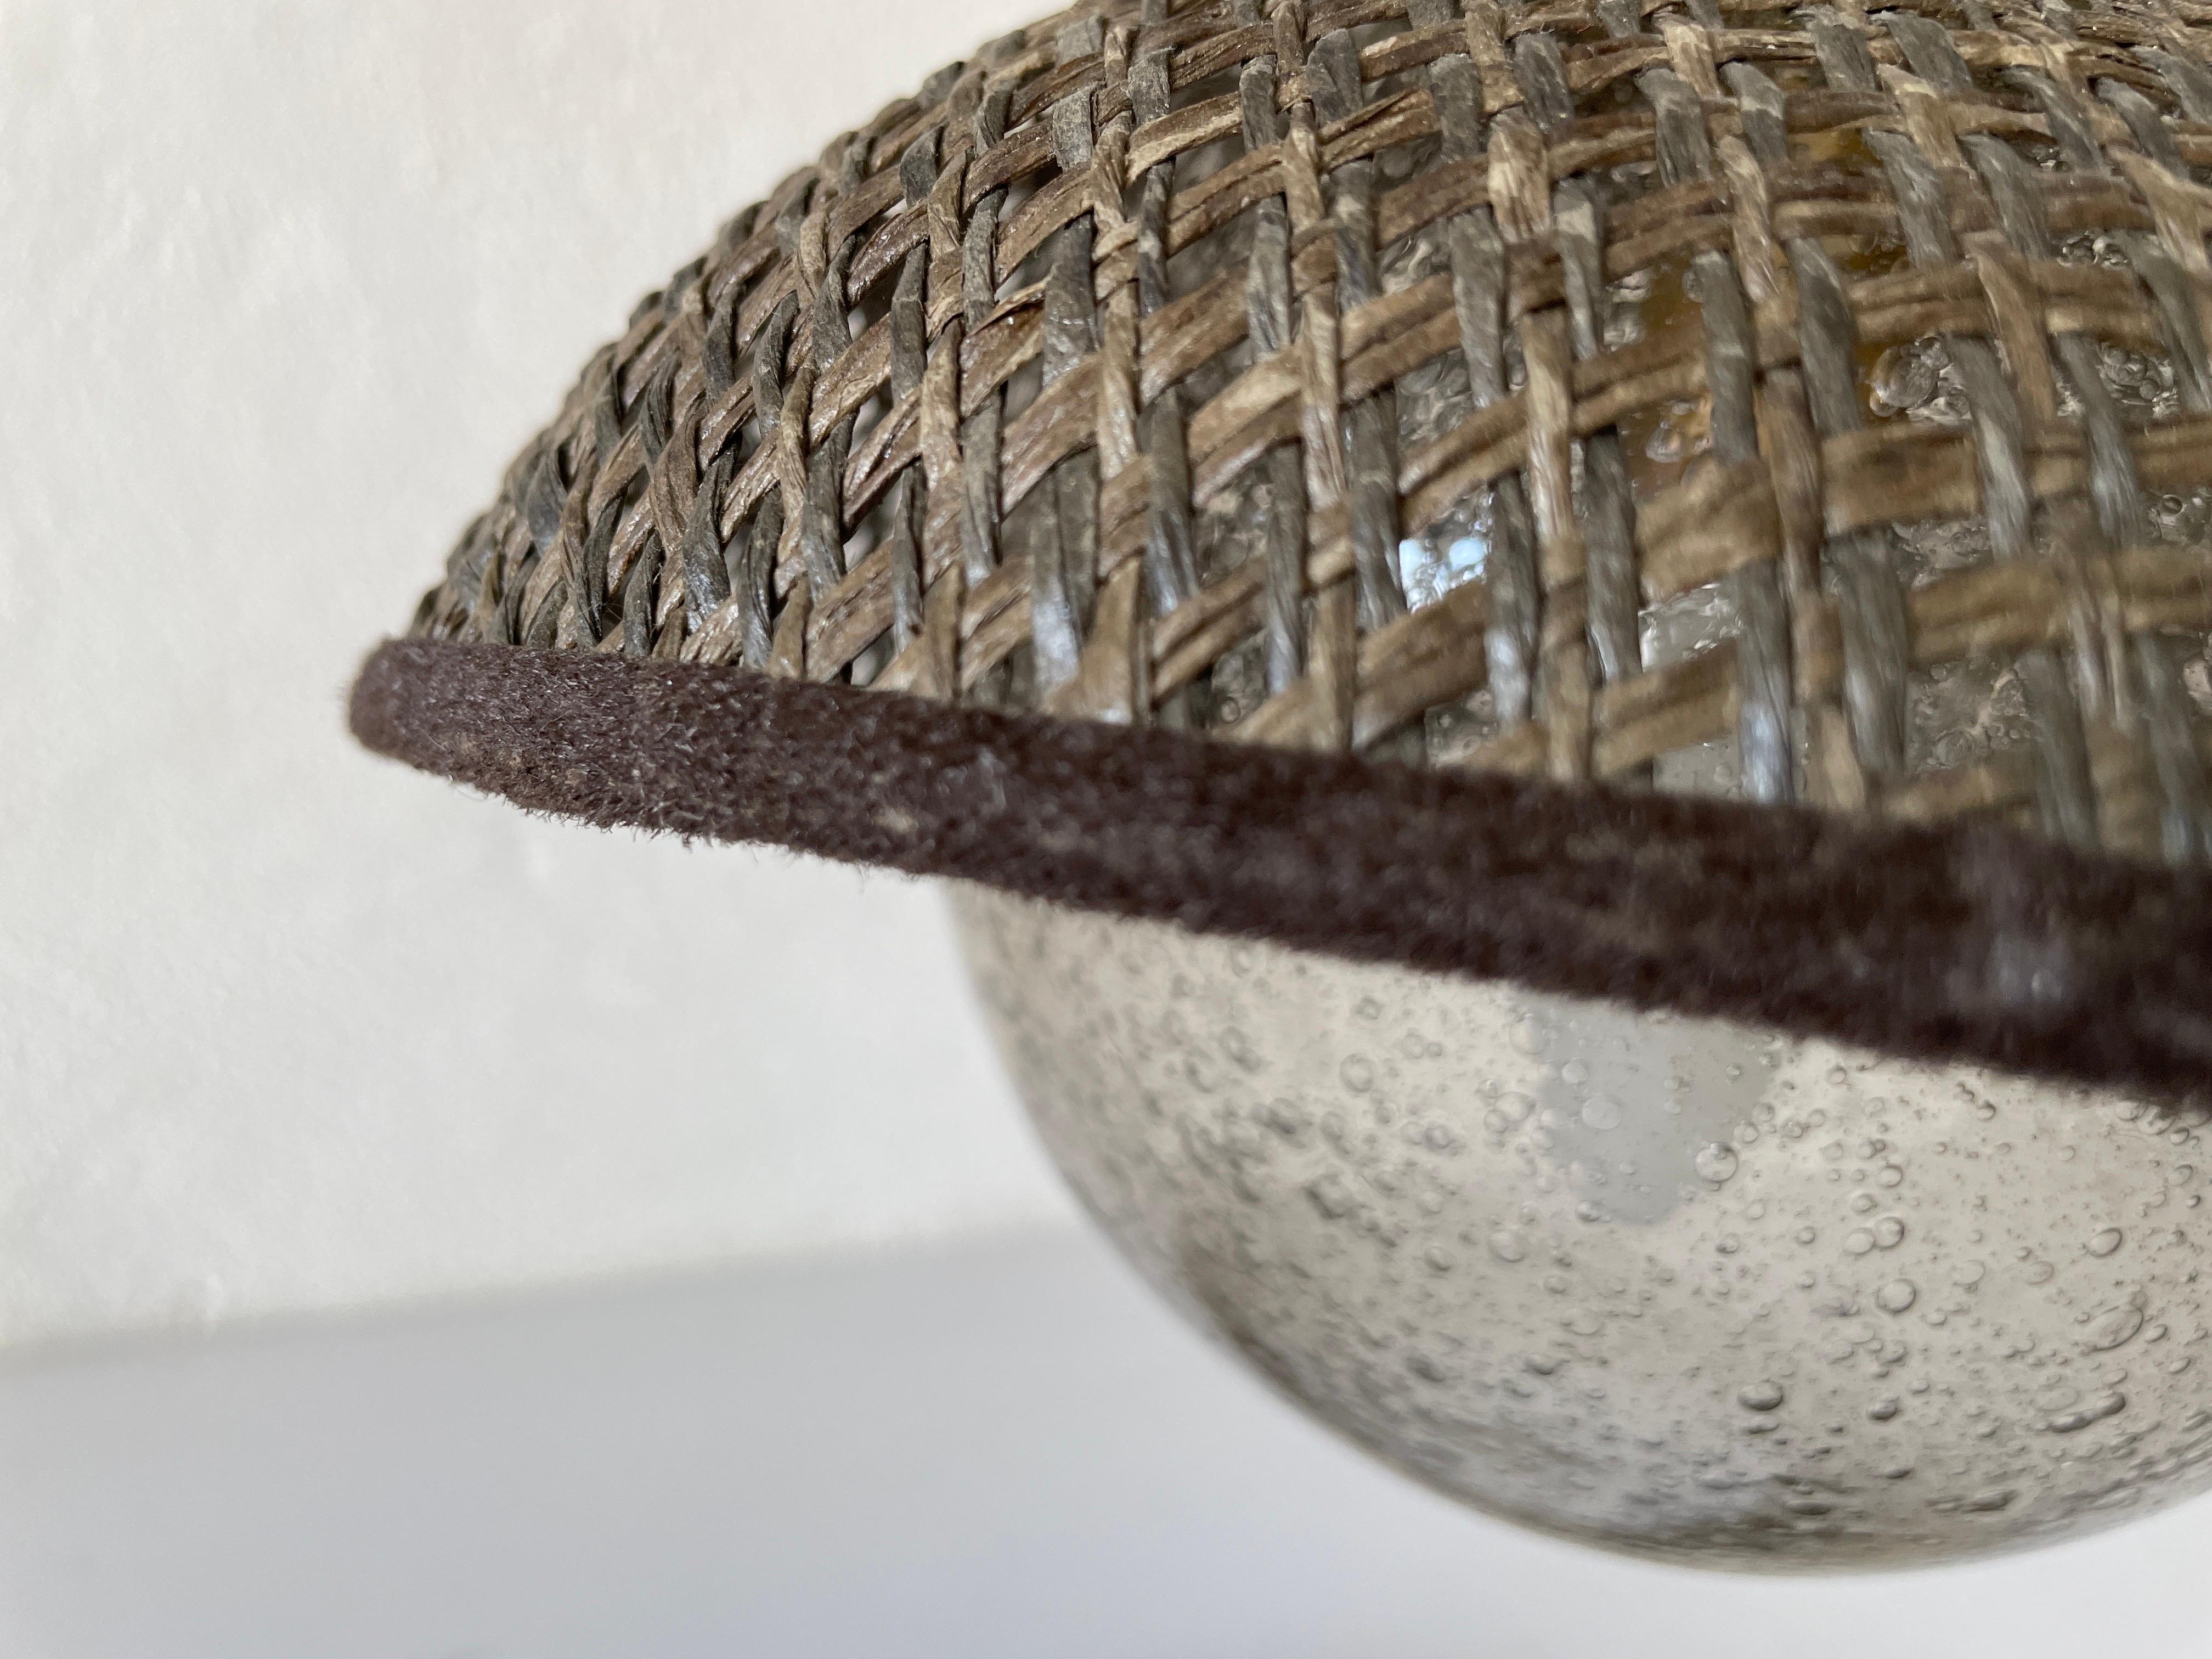 Swiss Rare Bamboo & Wicker Bedside Lamp Air Bubble Glass by Temde, 1960s, Switzerland For Sale